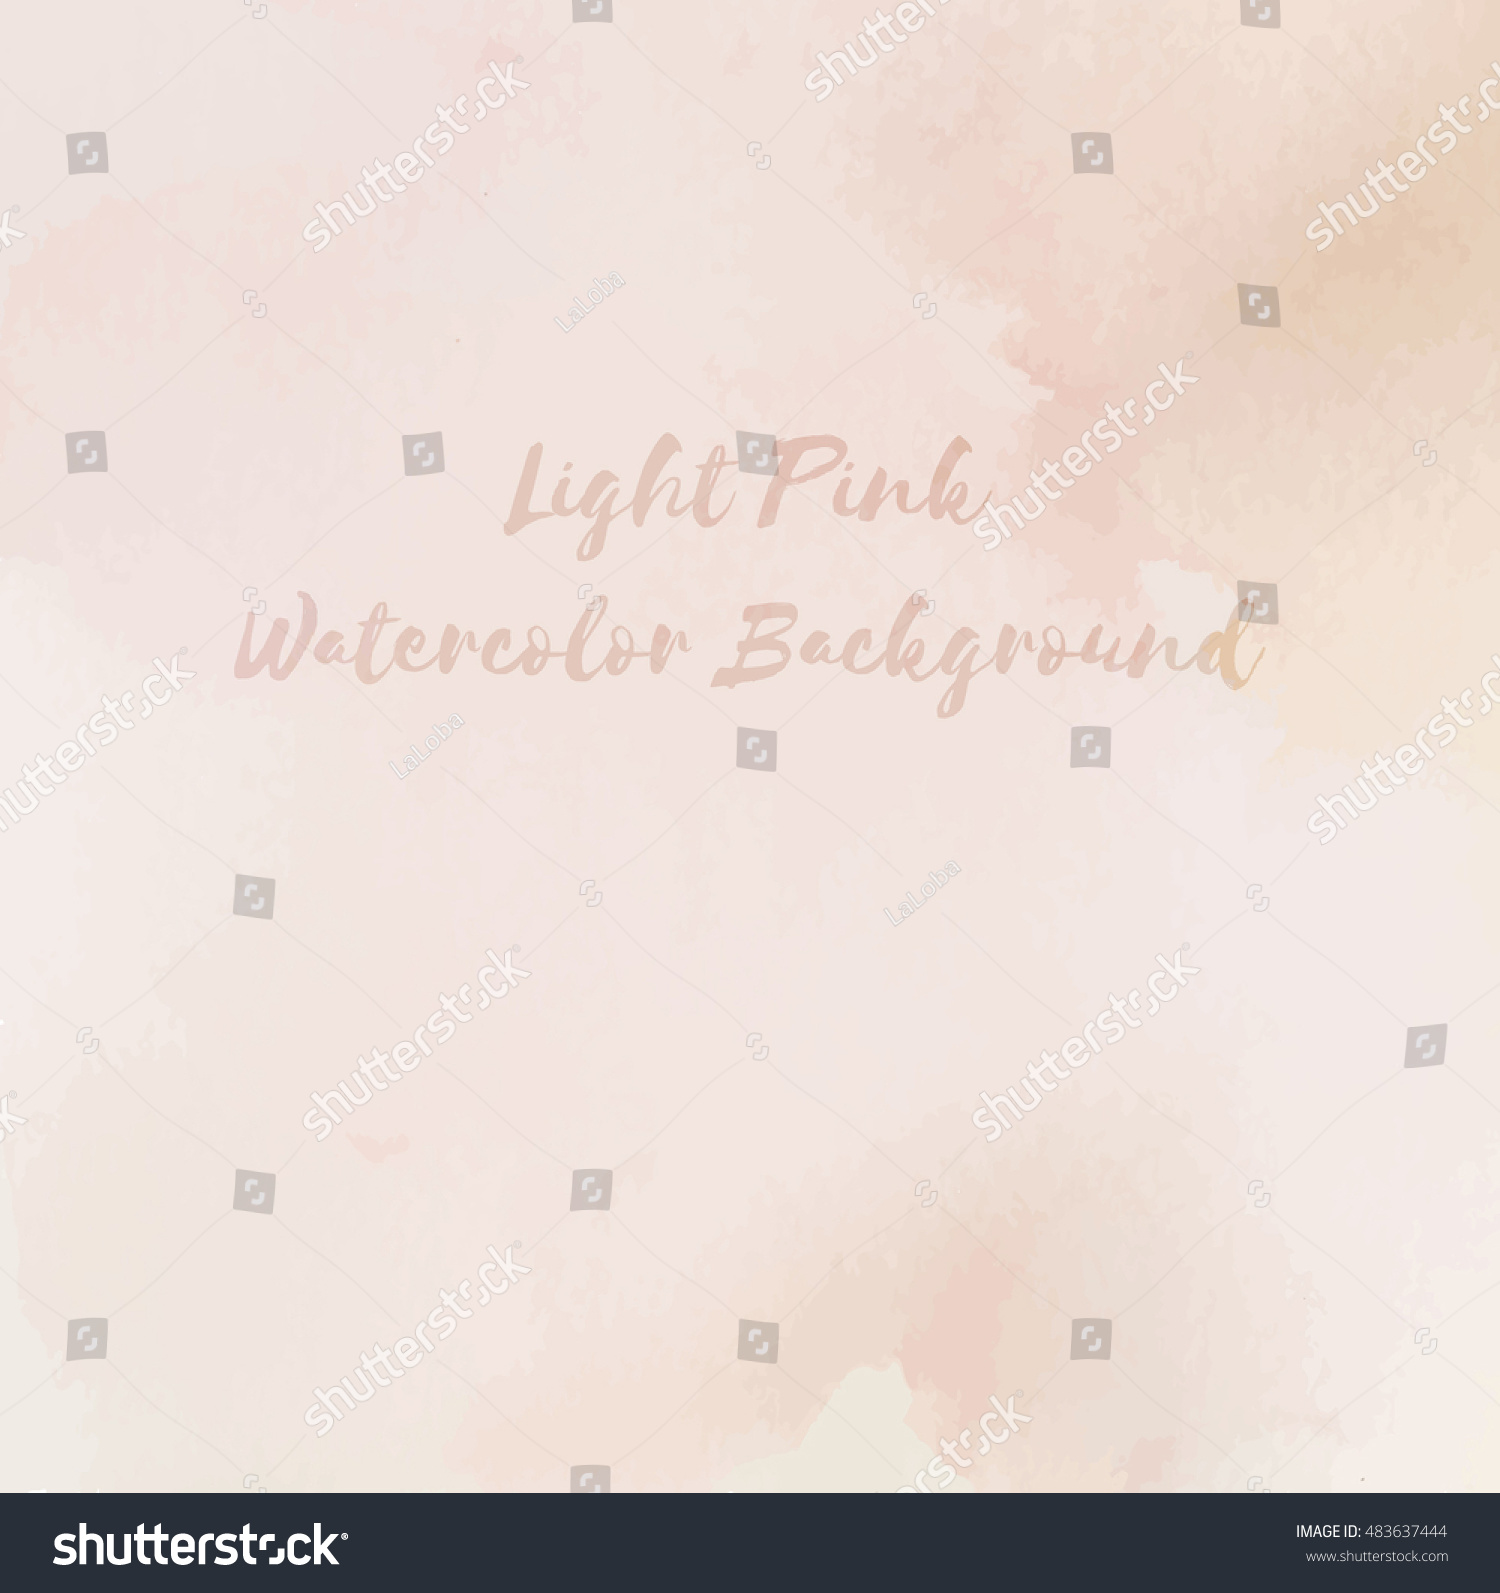 Light Pink Watercolor Background. Stock Vector Illustration 483637444